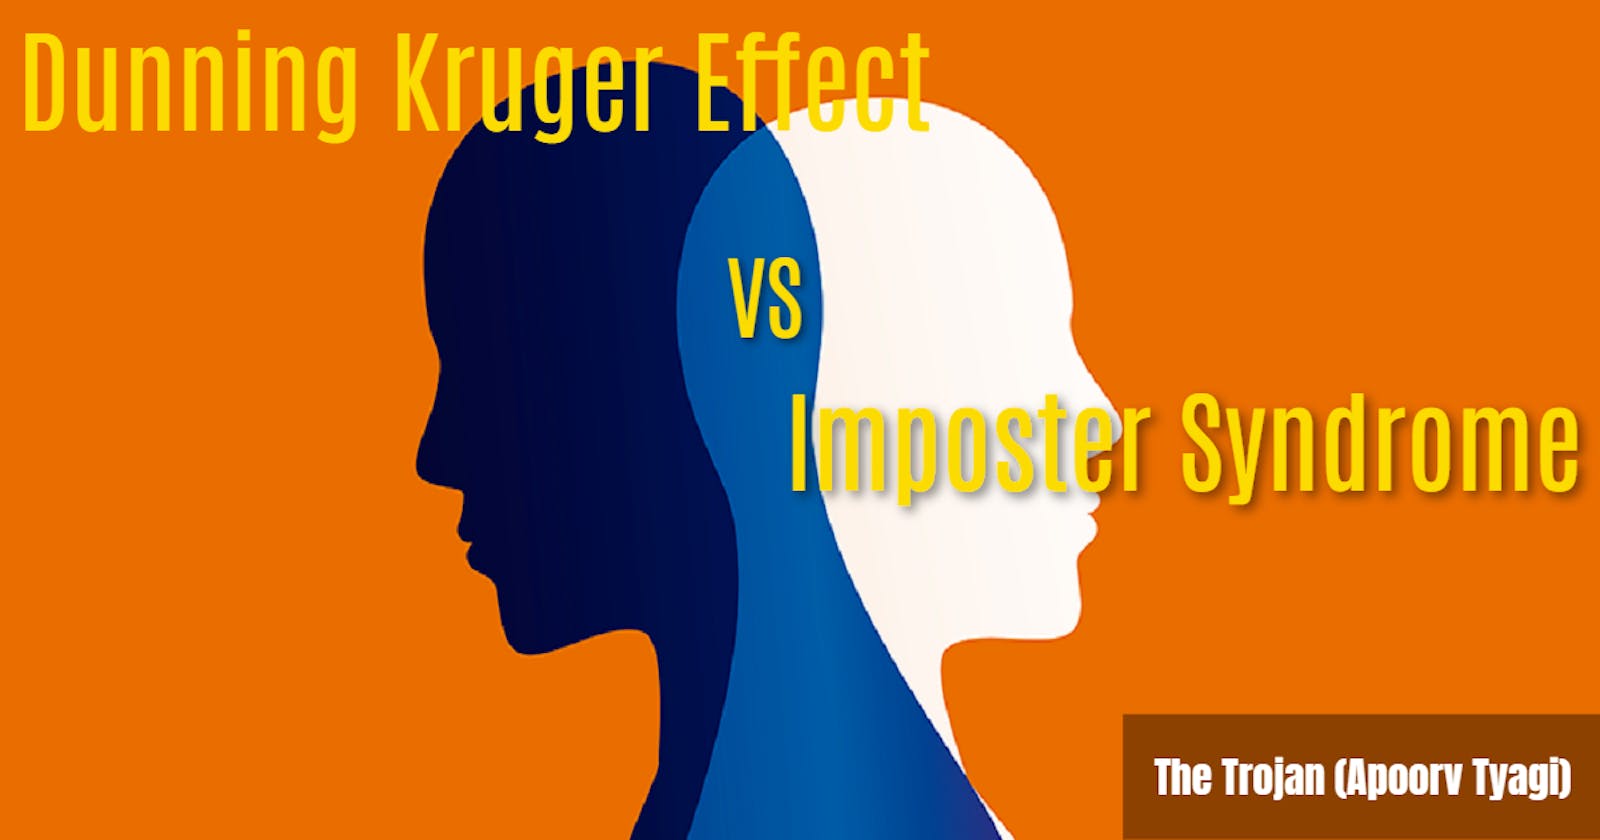 Dunning Kruger Effect and Imposter Syndrome